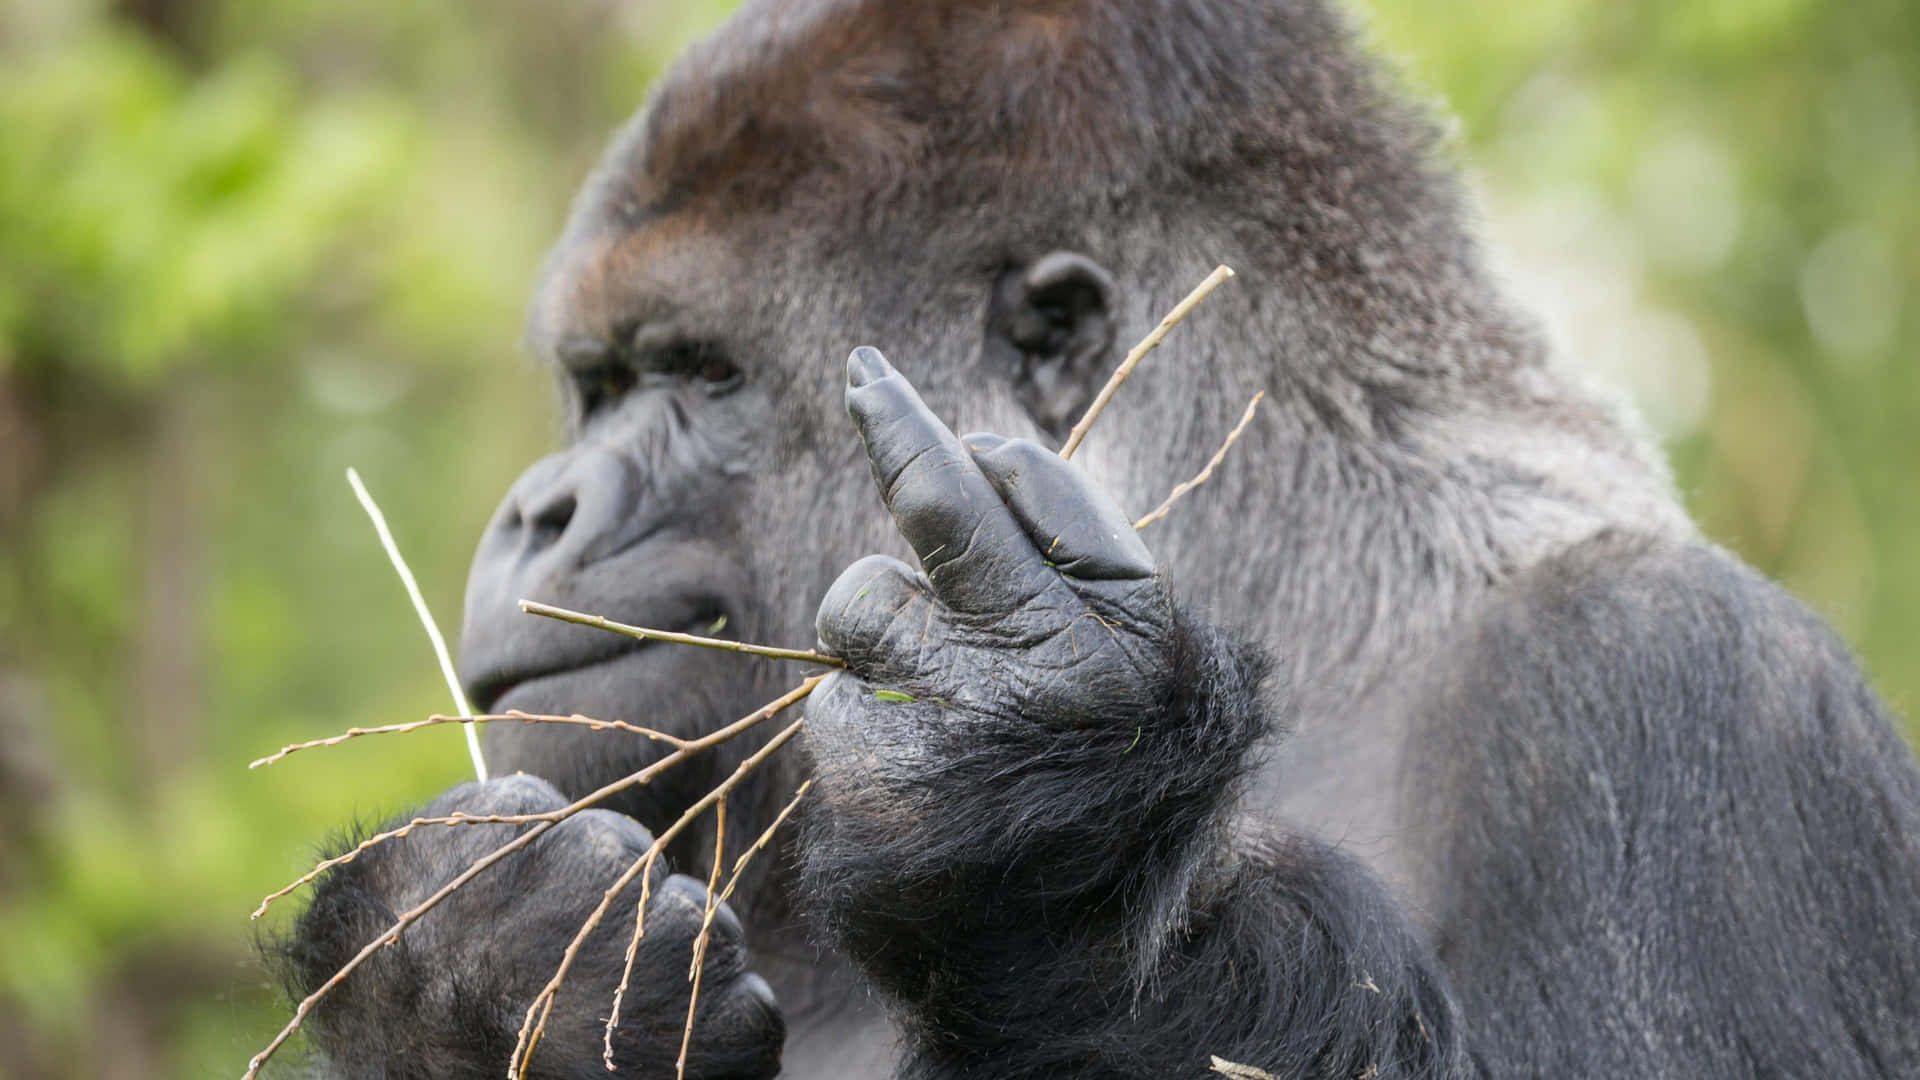 A Gorilla Is Holding A Branch In Its Hand